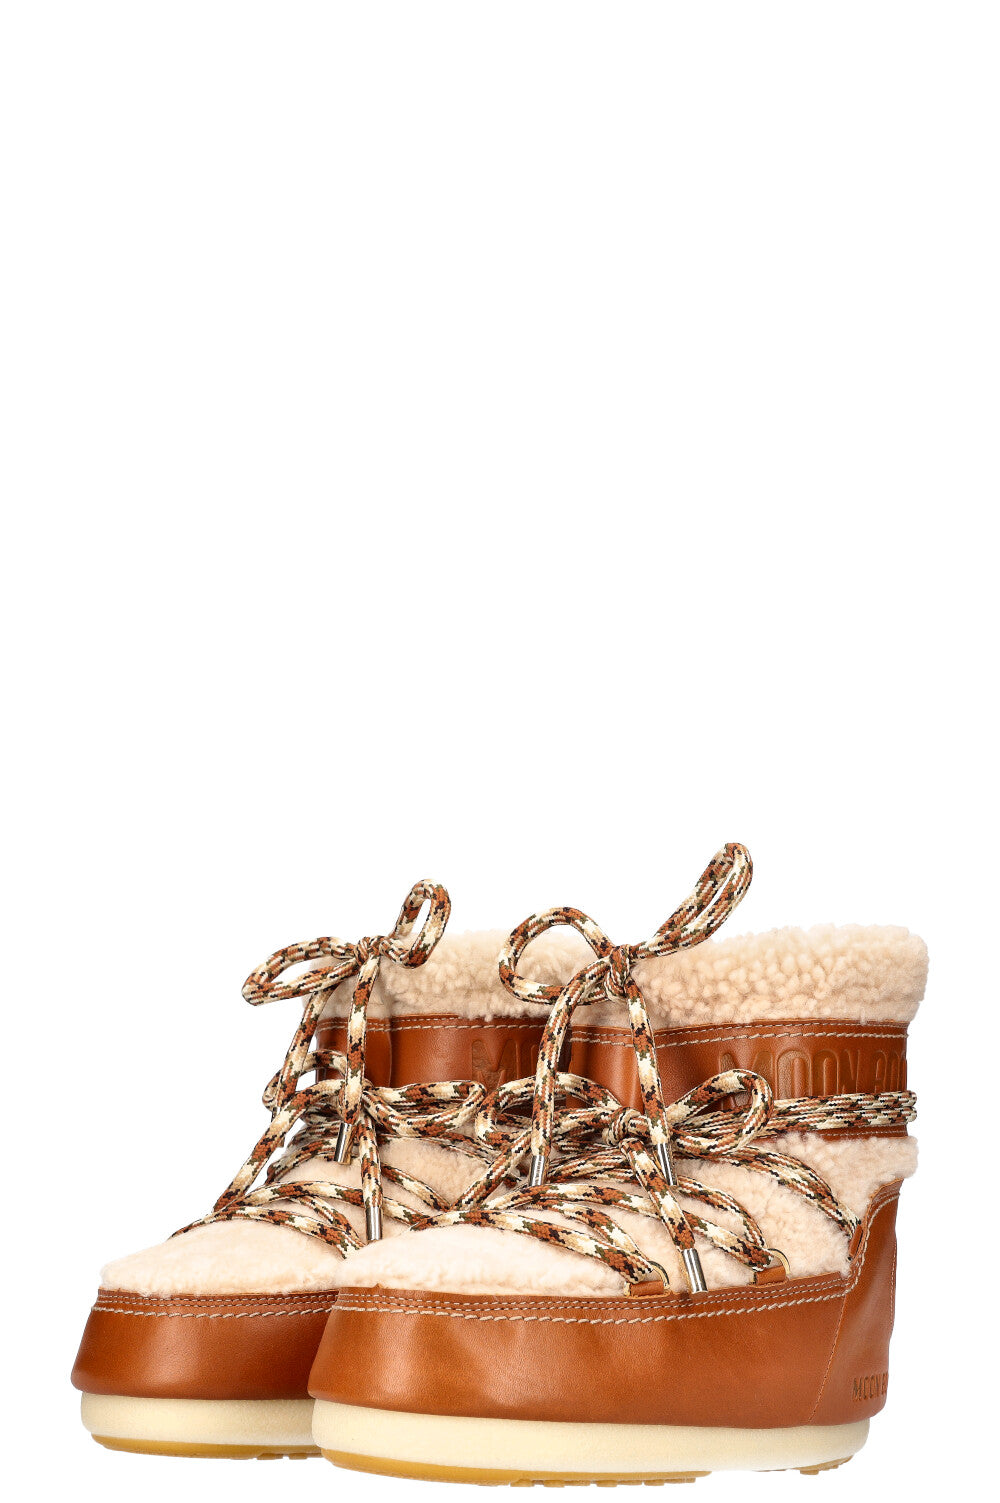 CHLOÉ x MOON BOOTS Shearling Boots Beige